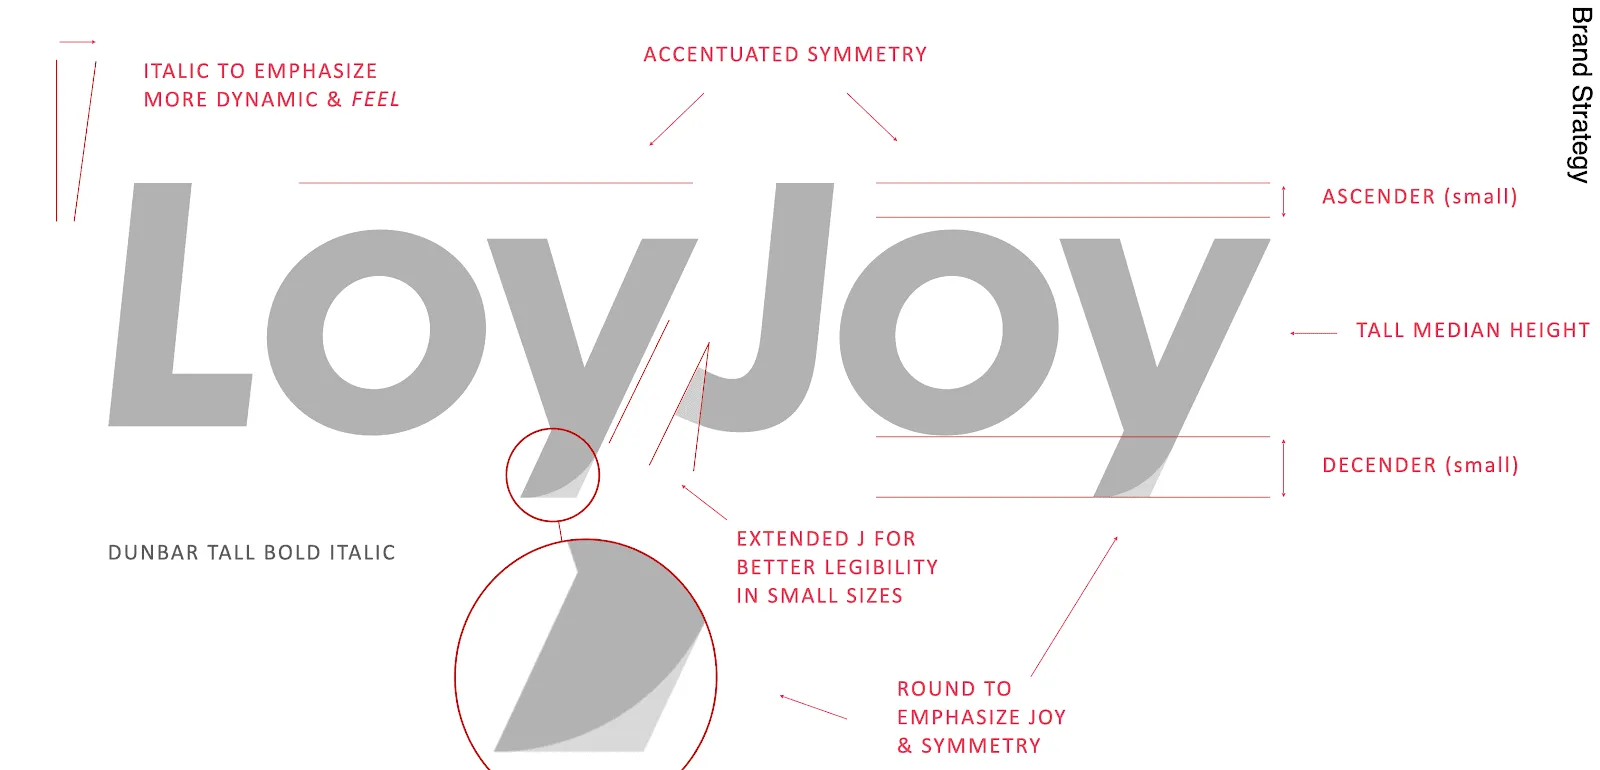 The development of the new LoyJoy logo. Italic to emphasize more dynamic and fell. Accentuated Simmetry of Loy and Joy. Dunbar tall bald italic, Round Ys to emphasize Joy &#x26; Symmetry and an extended J for Better legibility in small sizes.